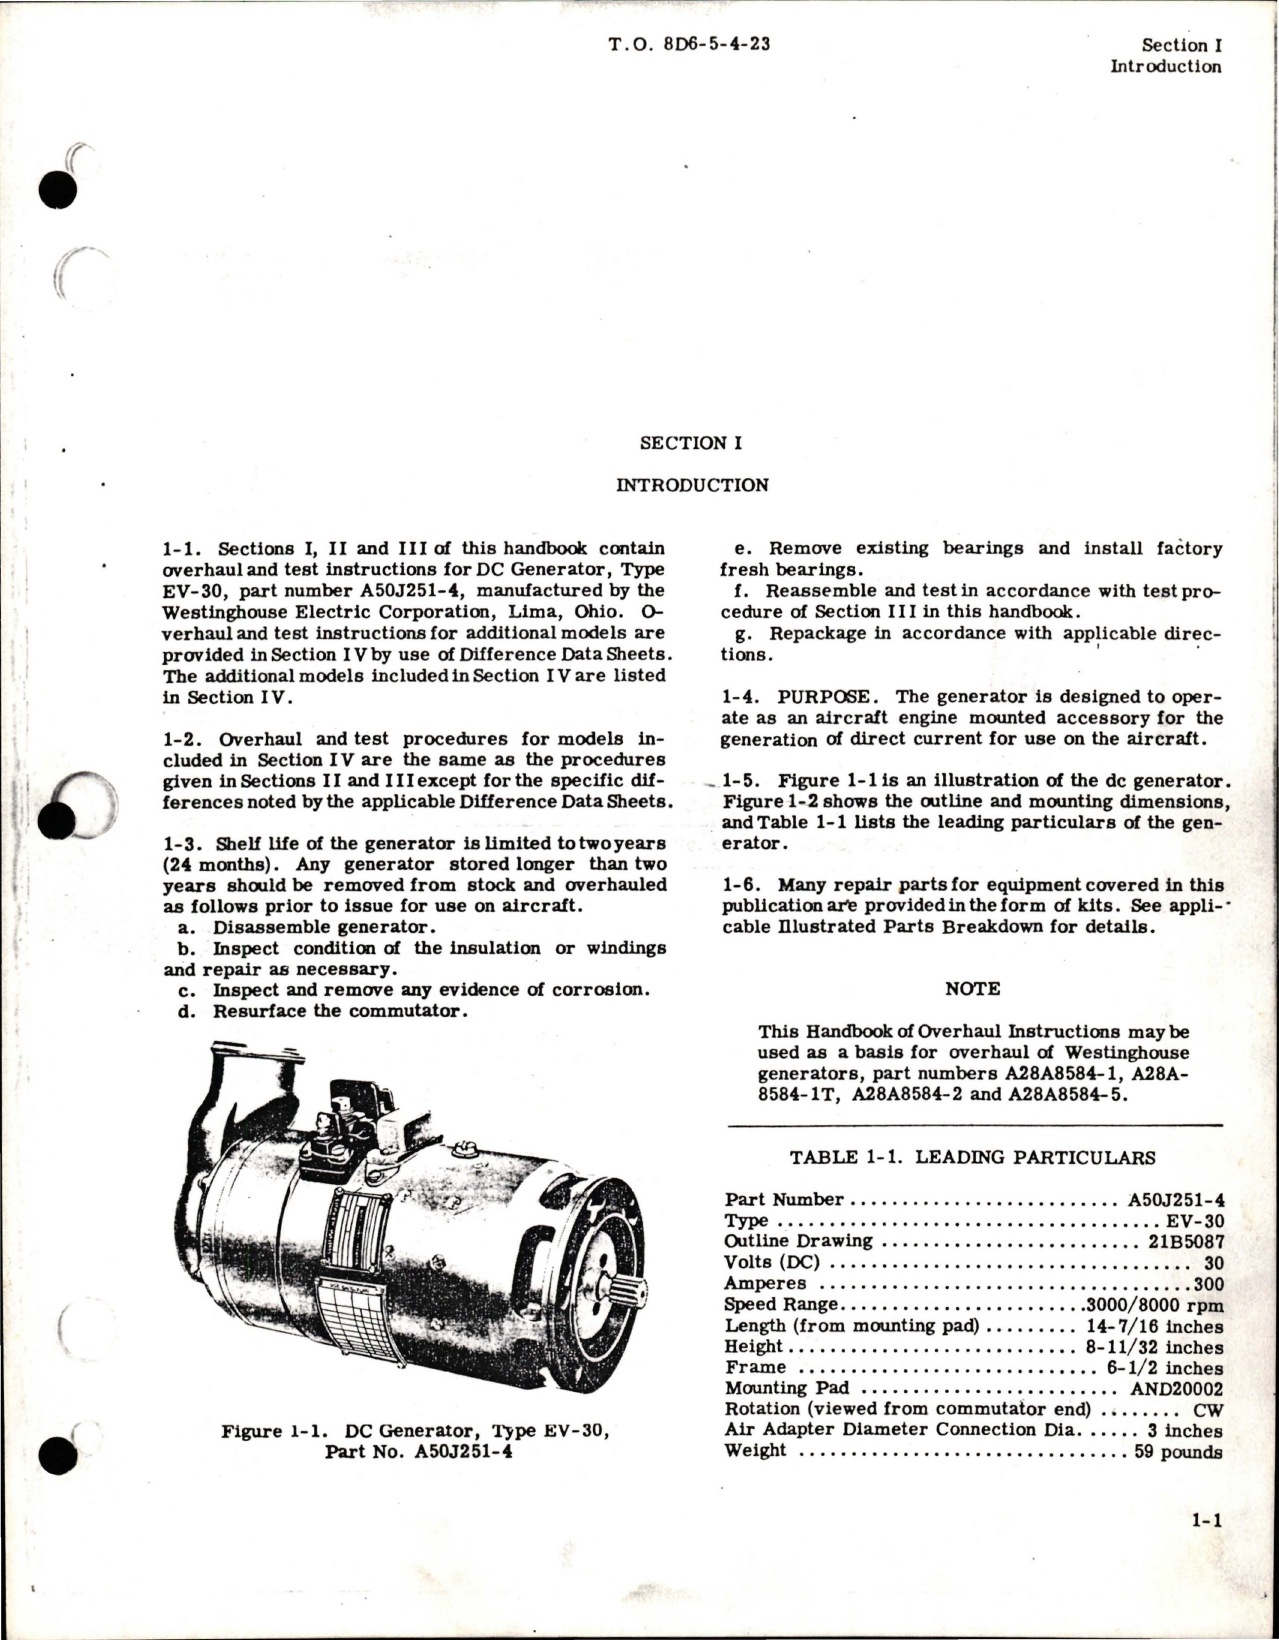 Sample page 5 from AirCorps Library document: Overhaul for DC Generator - Parts A50J251-4, A50J251-1 and 903J789-1